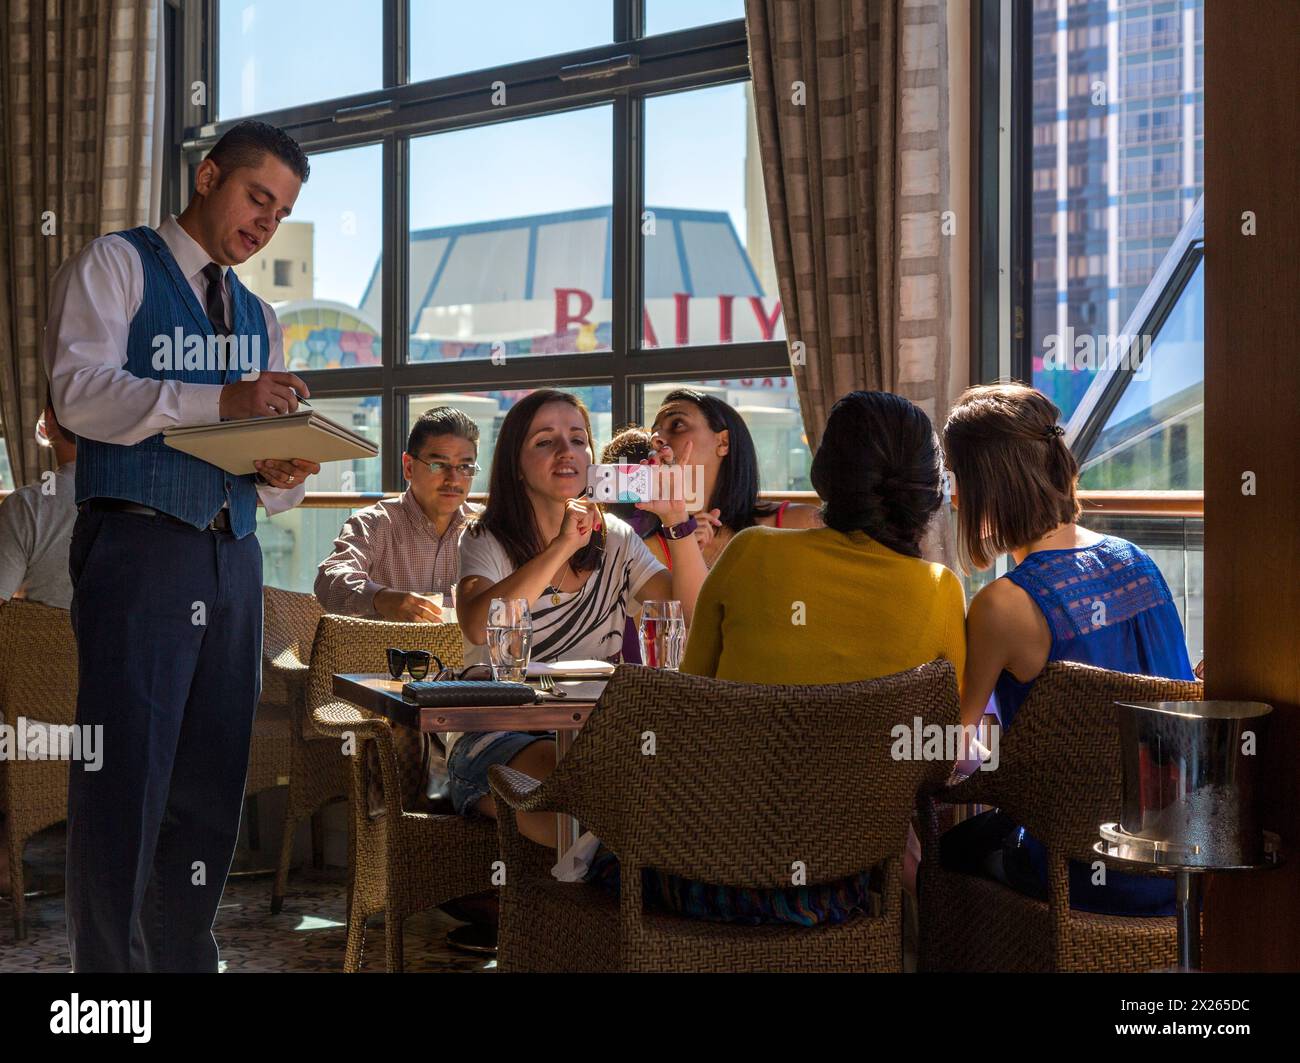 Las Vegas, Nevada.  Patrons Taking a Photo in the Giada Restaurant, The Cromwell Hotel. Stock Photo